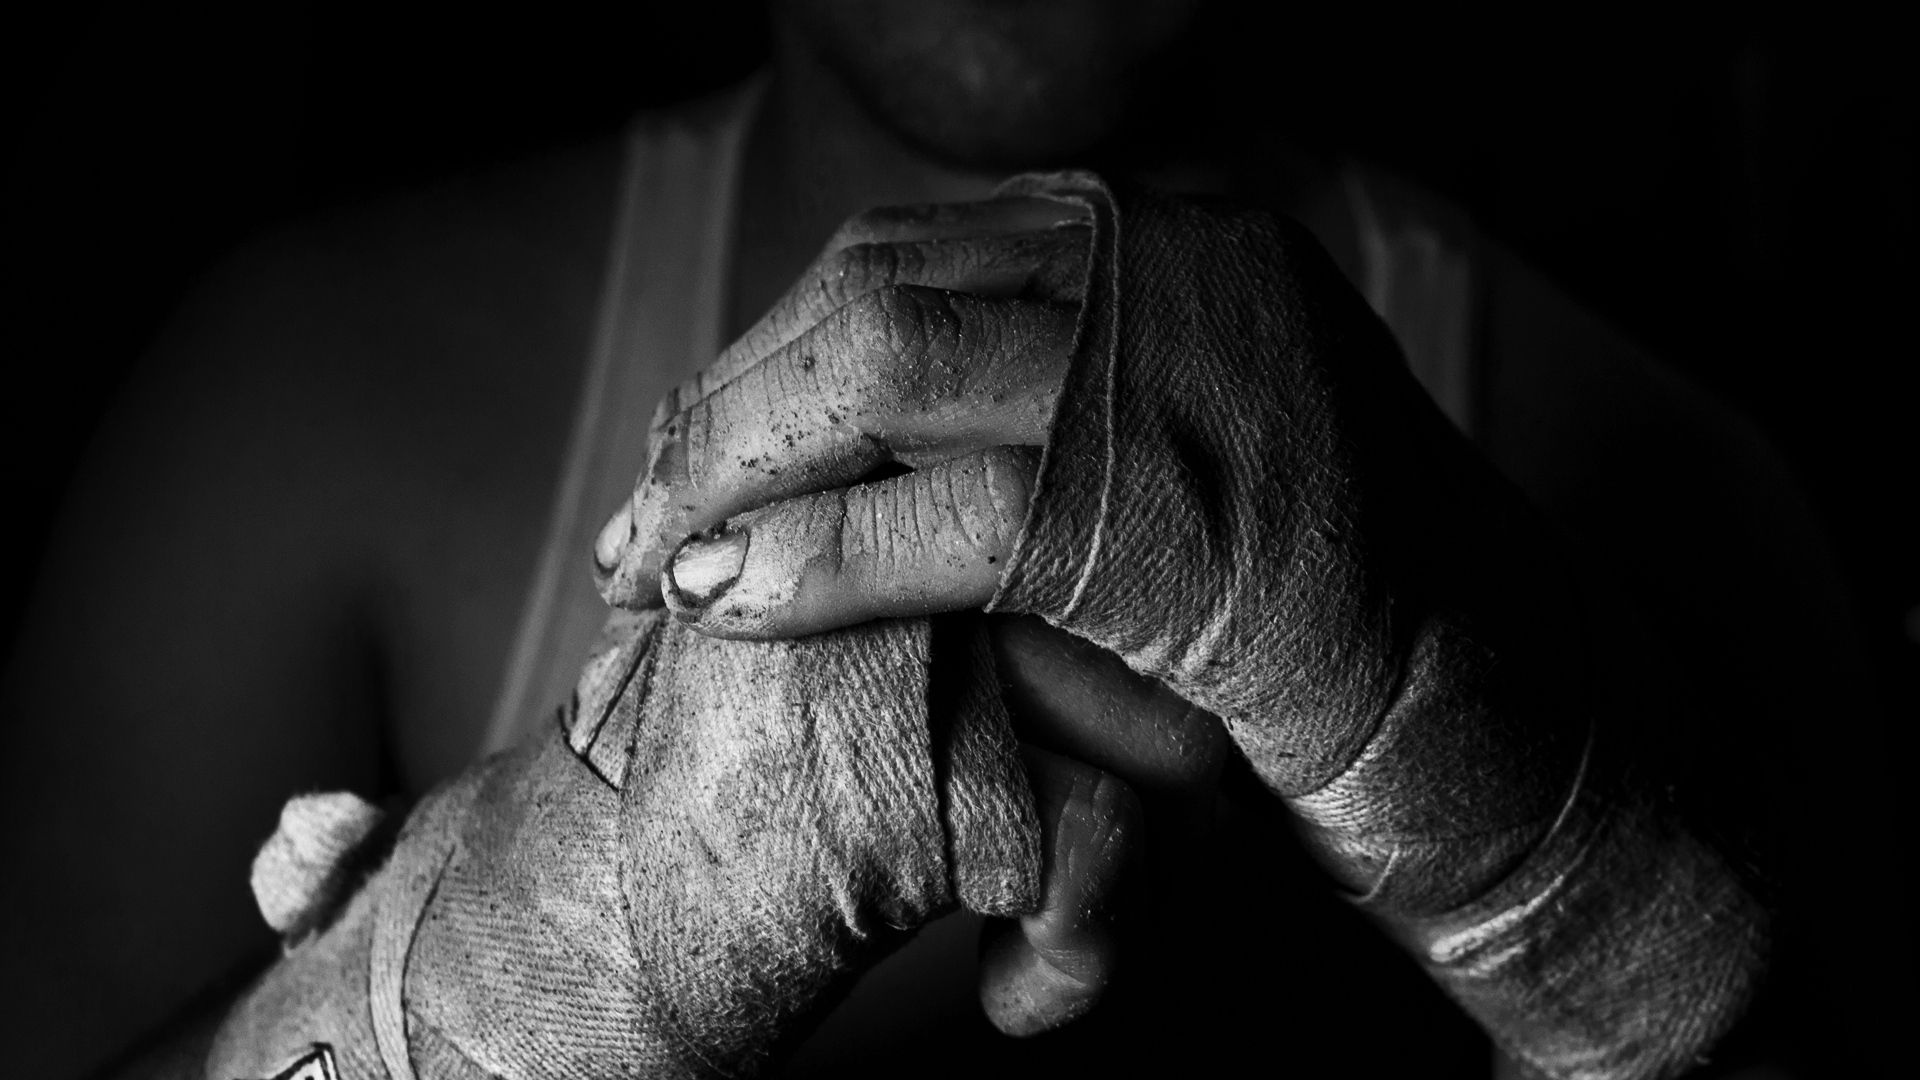 chb, sports, hands, bw, fighter, bandages iphone wallpaper